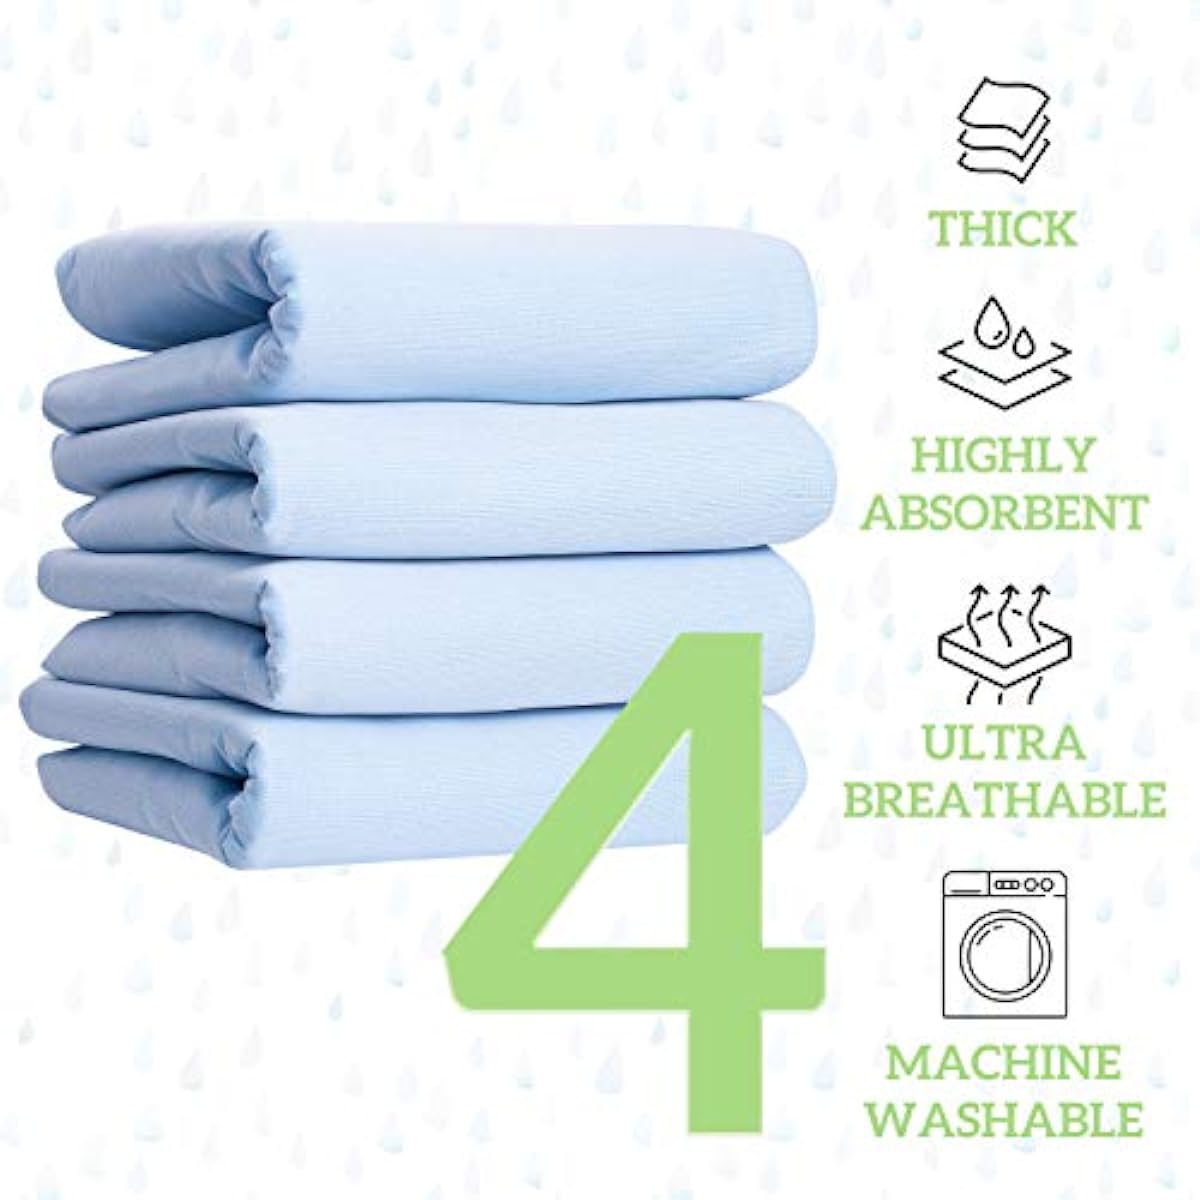 GREEN LIFESTYLE Washable Underpads 4 Pack - Large Bed Pads, 34\" x 36\", for use as Incontinence Bed Pads, Reusable Pet Pads, Great for Dogs, Cats, Bunny, Seniors Bed Pad (Pack of 4 - 34x36)